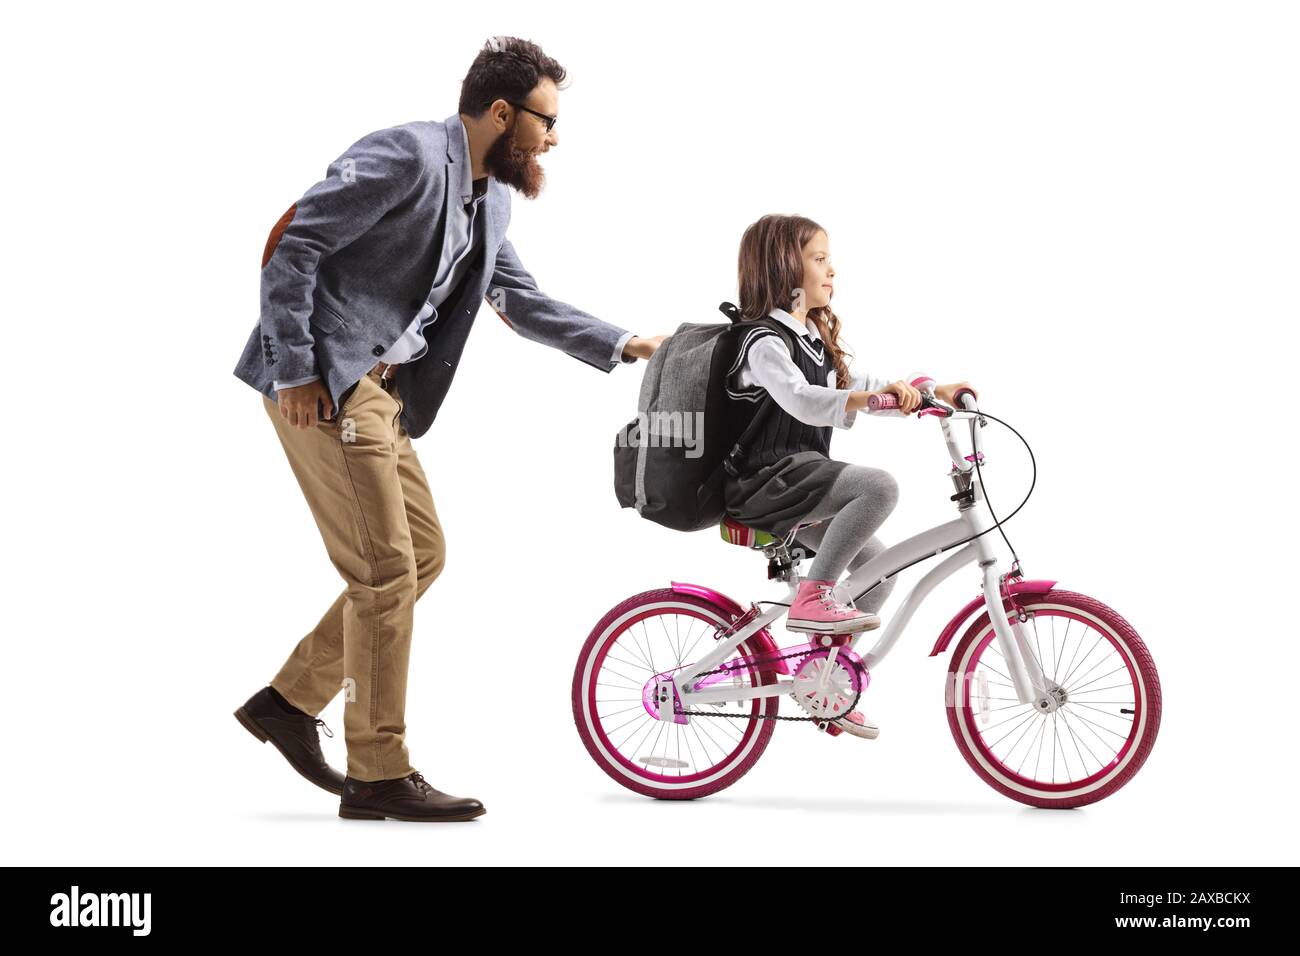 Father teaching a girl to ride a bicycle isolated on white background Stock Photo